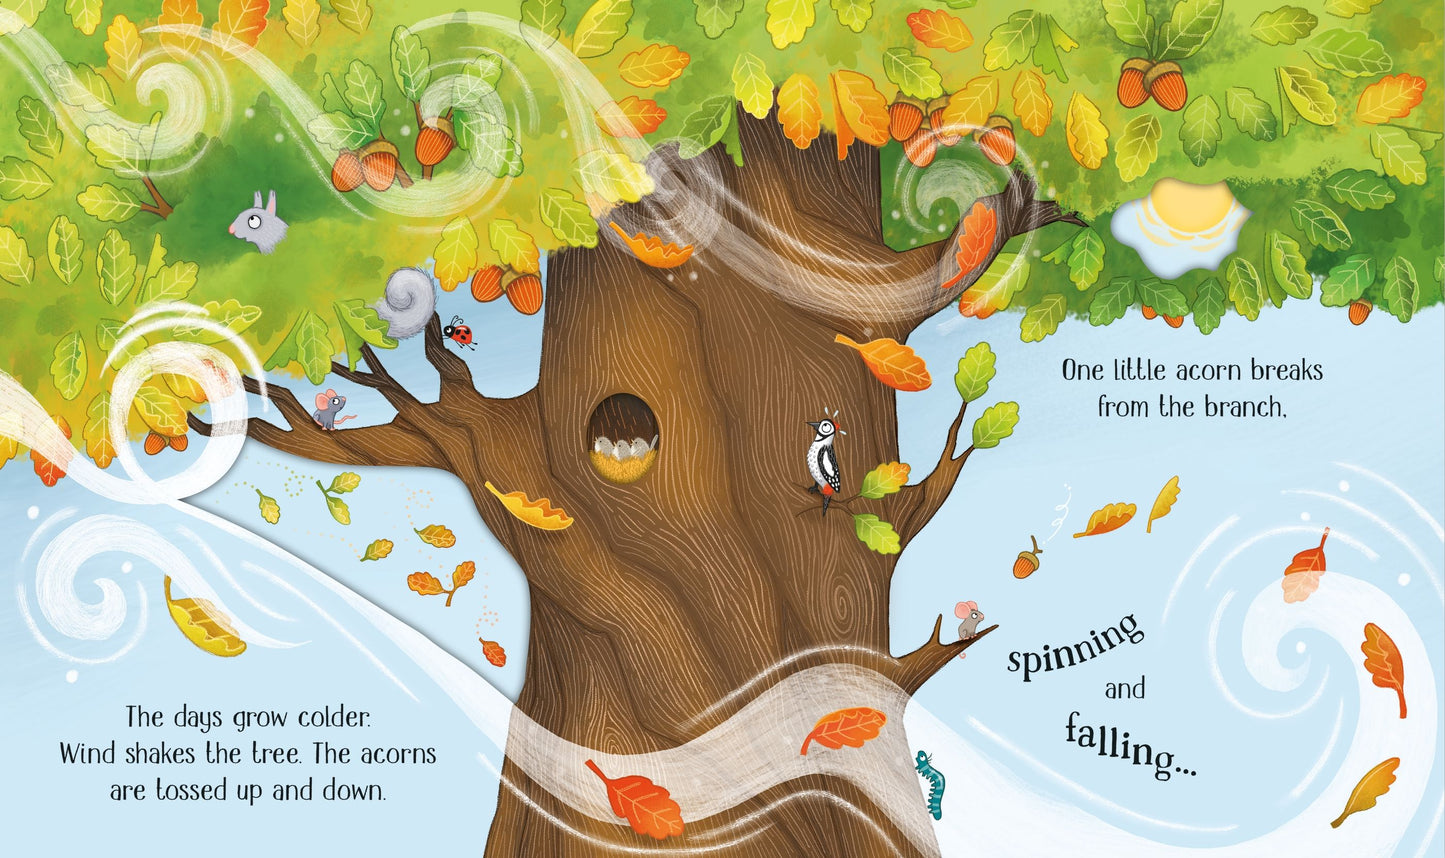 One Little Tree - Usborne Life Cycles Series - The Life Cycle of an Oak Tree